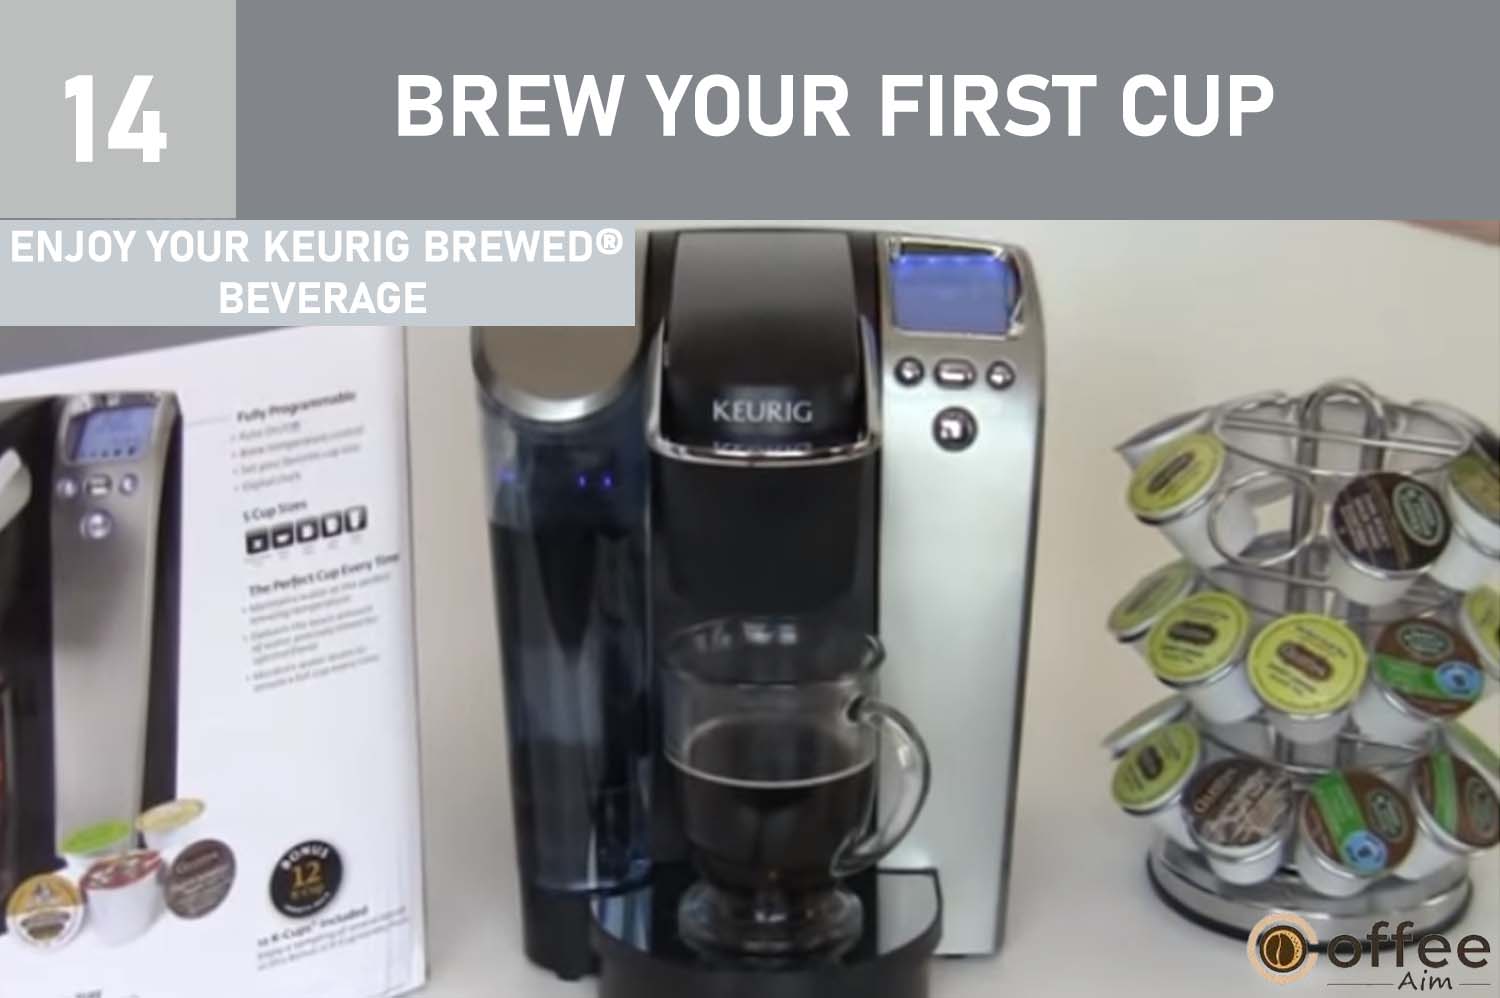 Enjoy the delightful taste of your first cup of Keurig Brewed gourmet coffee, tea, or hot cocoa, savoring the rich flavors and convenient brewing experience.